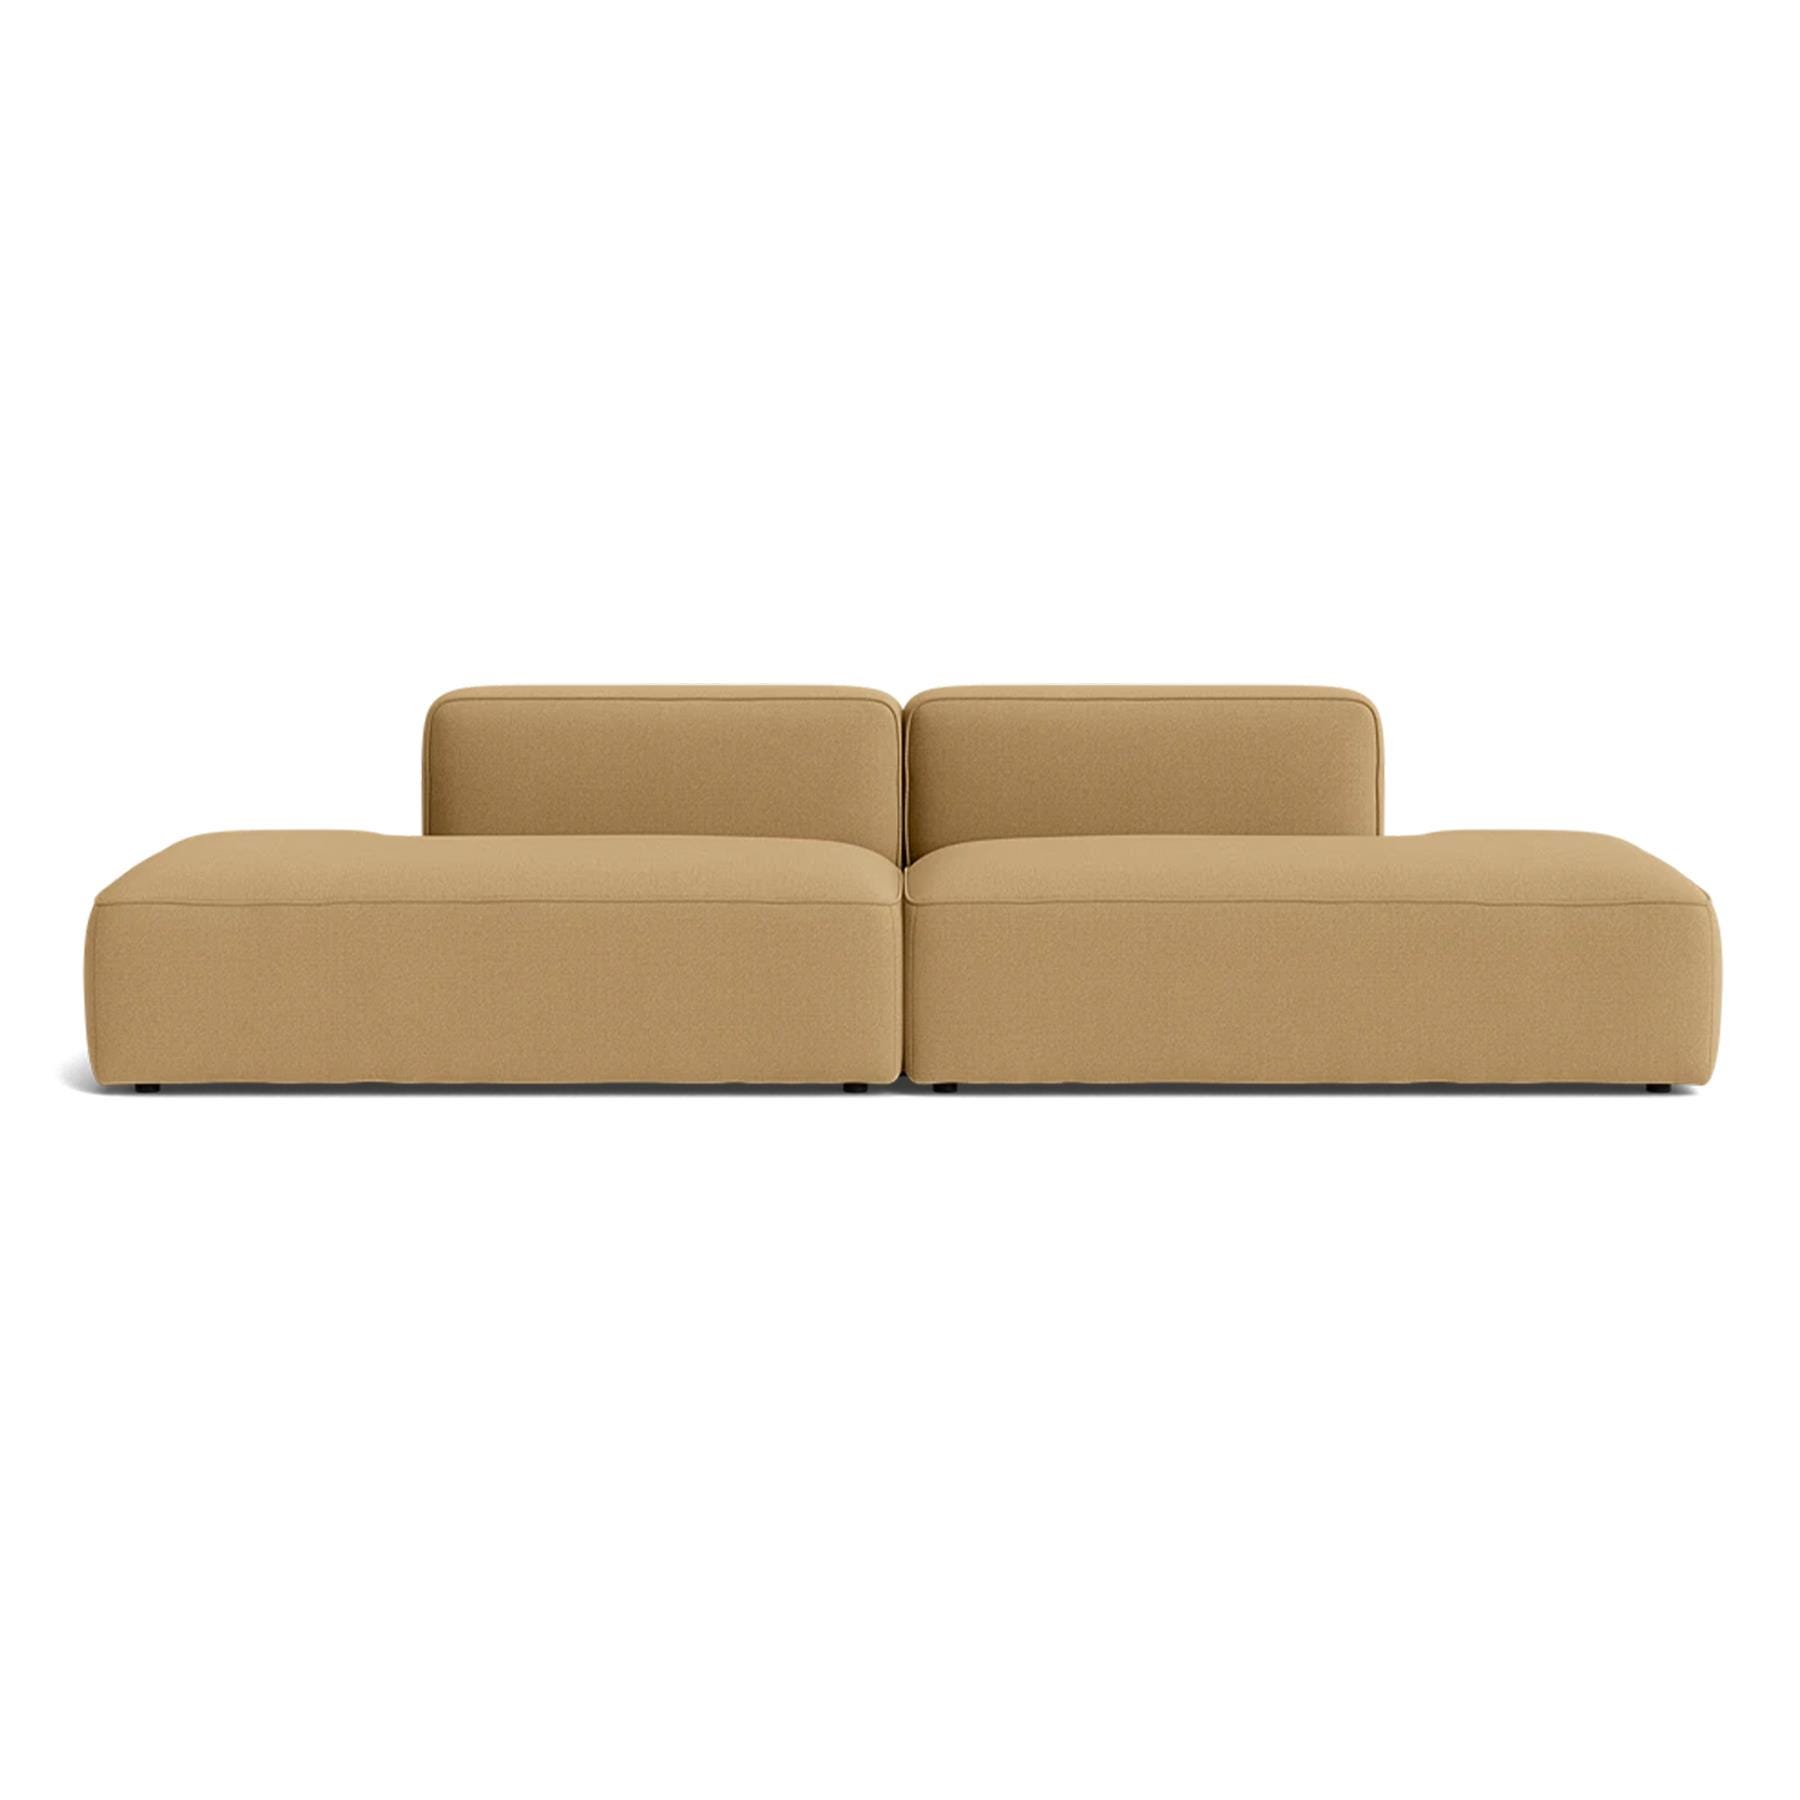 Make Nordic Basecamp Xl Sofa With 2 Open Ends Vidar 333 Brown Designer Furniture From Holloways Of Ludlow